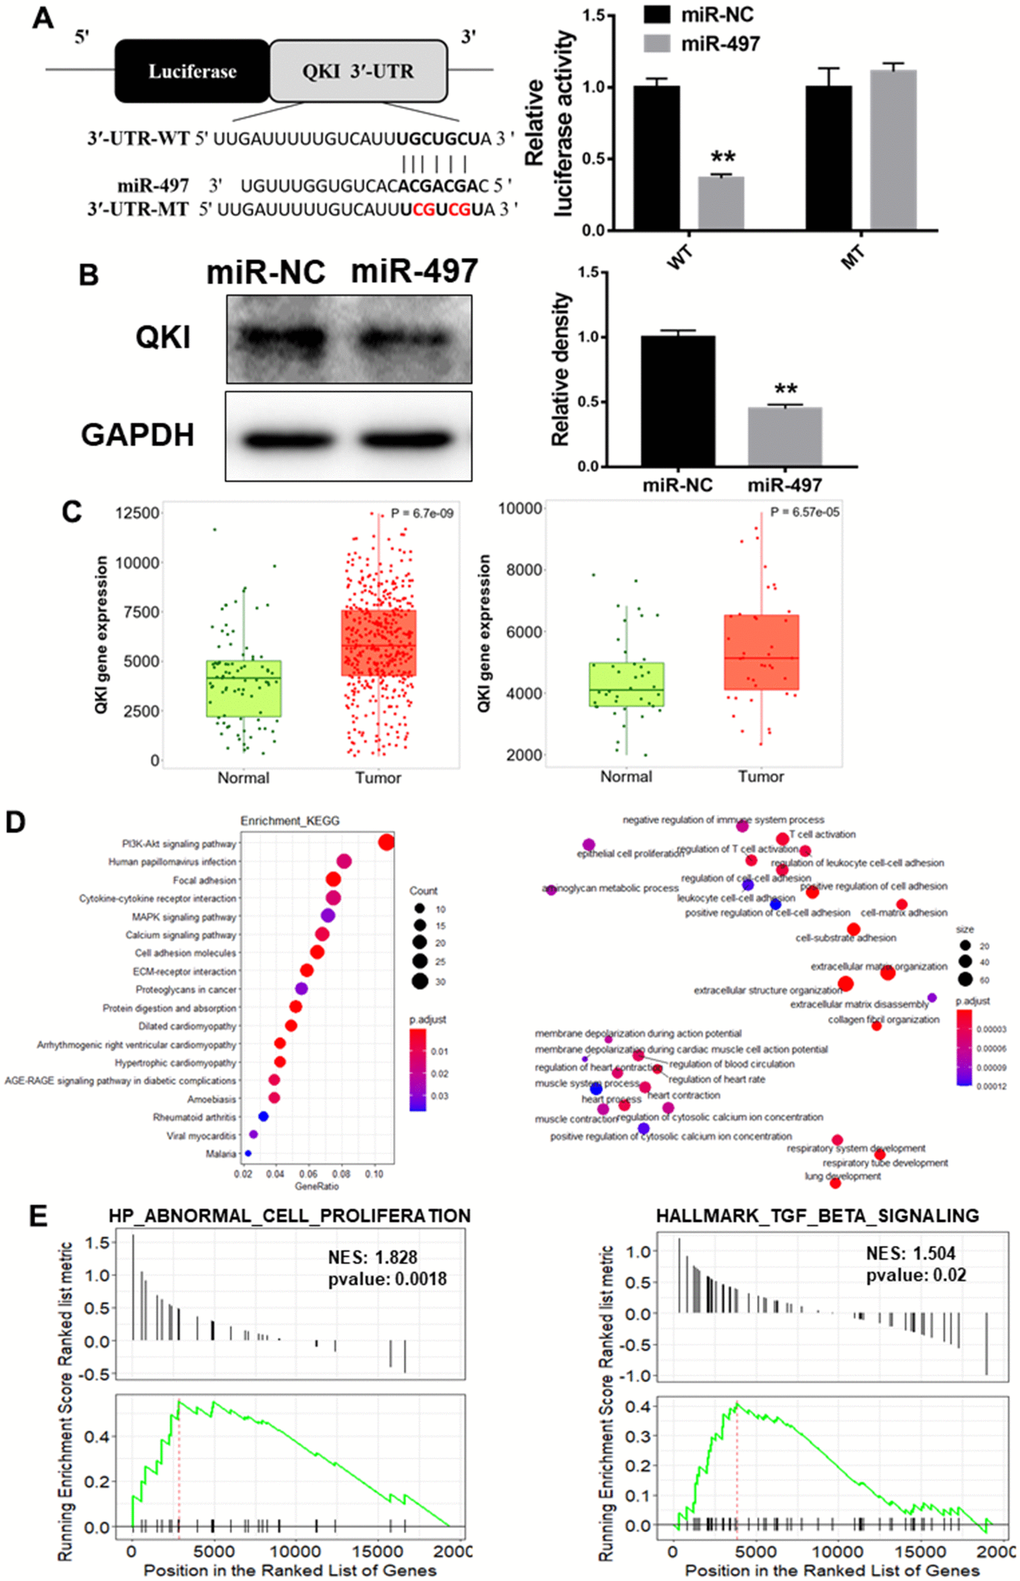 QKI is a direct target of miR-497, and QKI expression levels were correlated with tumor progression in EC samples. (A) Overexpression of miR-497 inhibited the luciferase activity of QKI 3’ UTR reporter. (B) Overexpression of miR-497 greatly inhibited protein expression levels of QKI. (C) The expression levels of QKI were significantly upregulated in non-paired and paired EC tissues compared to the normal ones. (D) KEGG and GO (MF) analysis of esophageal cancer tissues showed that QKI is associated with cell proliferation and cell adhesion signal pathways. (E) GSEA analysis of esophageal cancer tissues conveyed that QKI expression levels were positively correlated with cell proliferation and metastasis in EC tissues. Data were representative of 3 independent experiments. ** indicated significant difference at p